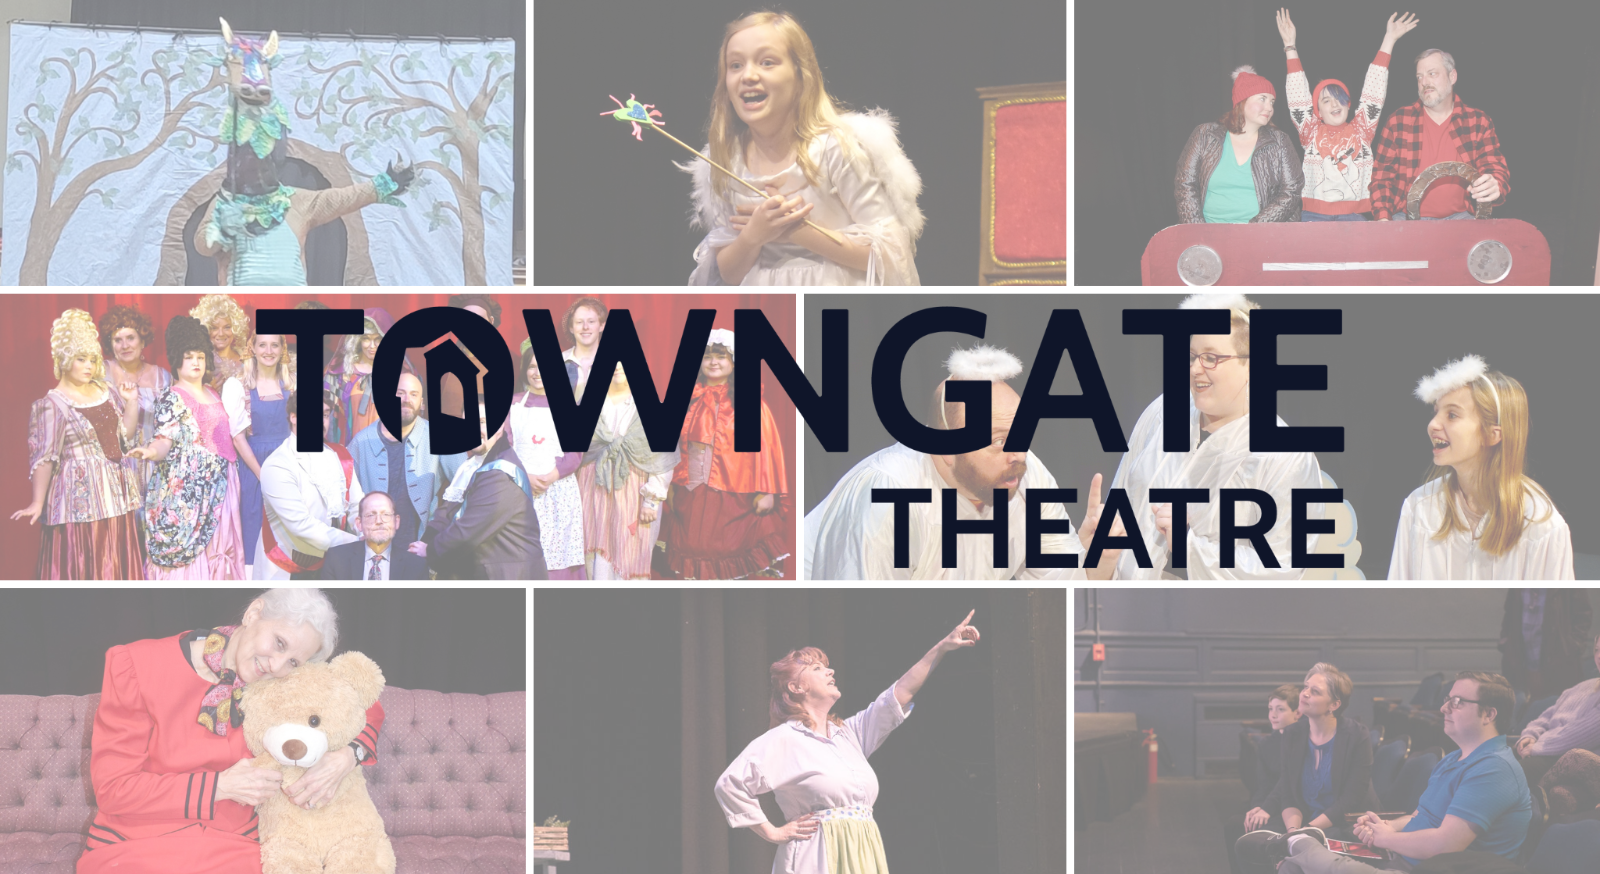 Towngate Theatre wordmark over images of actors in plays.